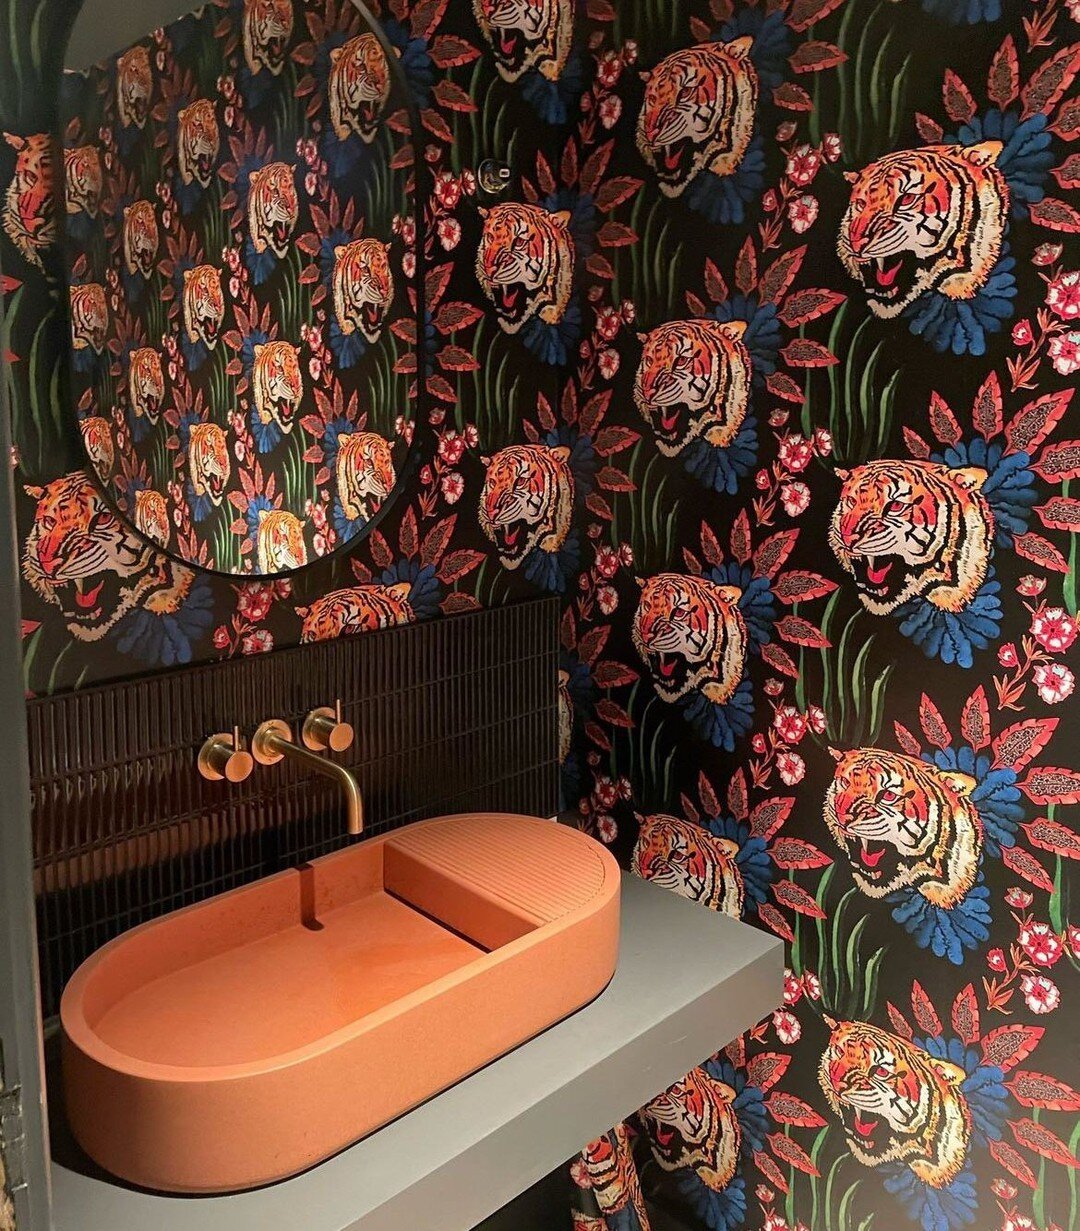 Rich tones and statement wallpaper elevate the luxe levels in this vibrant powder room, a space to let your creativity run wild.⁠ 💫
⁠
Featuring Aura in Ember⁠.⁠
⁠
@raokayyor81⁠
⁠
Bold design | Punchy powder rooms | Colourful bathrooms⁠
⁠
#kastconcre